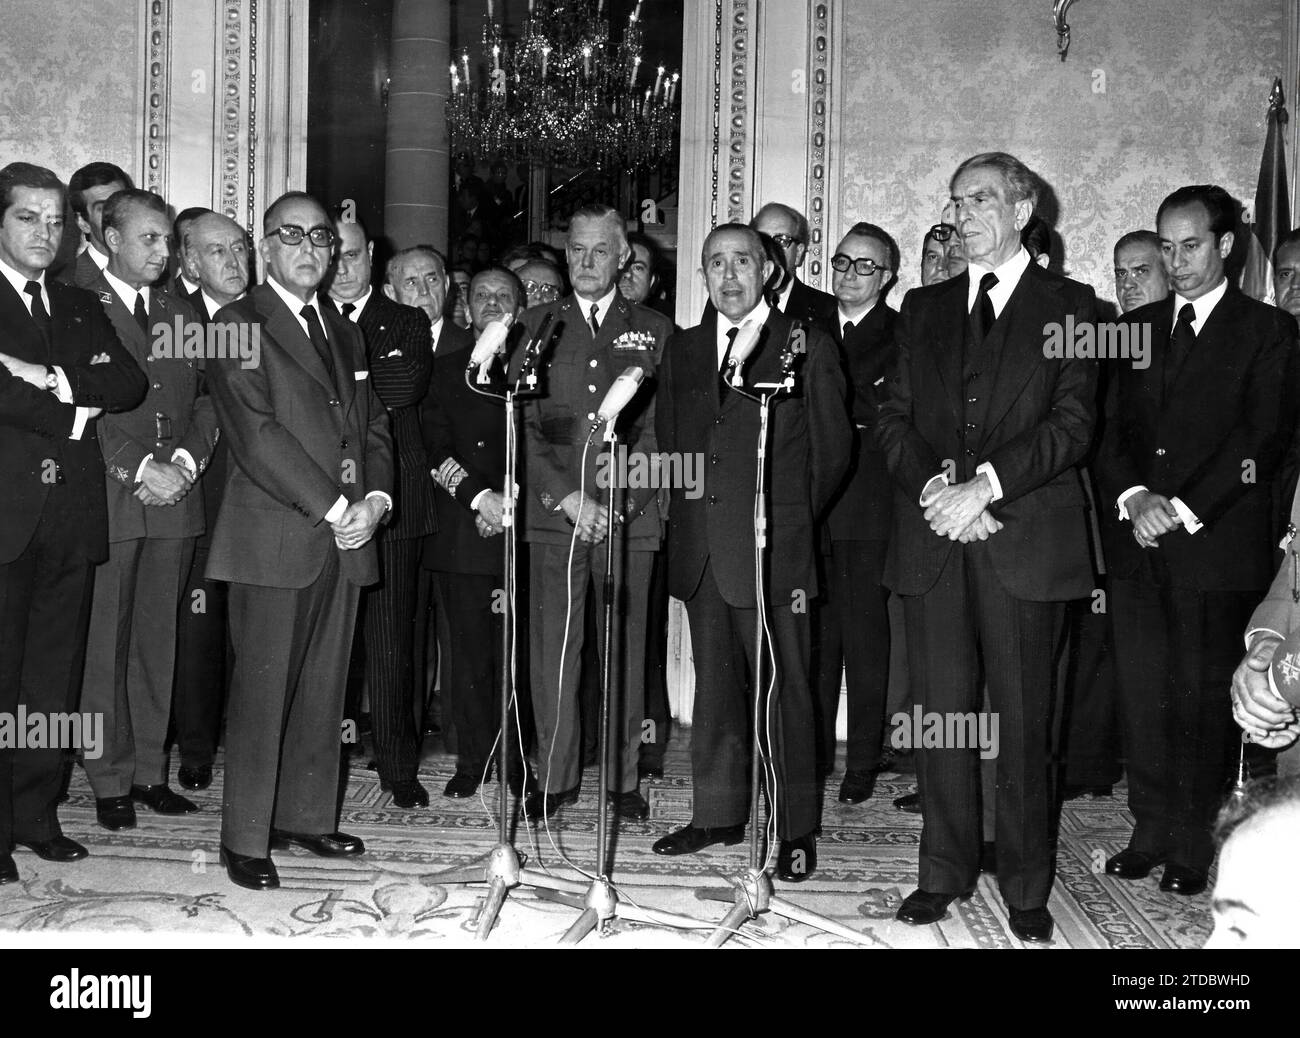 12/12/1975. Inauguration of the presidency The inauguration ceremony of the New Ministers was held in the presidency of the government. First, the former first vice president and Minister of the Interior, Mr. José García Hernández, said some farewell words on behalf of the Outgoing Cabinet. The new Vice President for Defense Affairs and Minister without Portfolio, Lieutenant General Don Fernando de Santiago y Díaz de Mendívil, spoke later. The event closed with a speech by the President, Mr. Carlos Arias from Navarre. Credit: Album / Archivo ABC / Teodoro Naranjo Domínguez Stock Photo